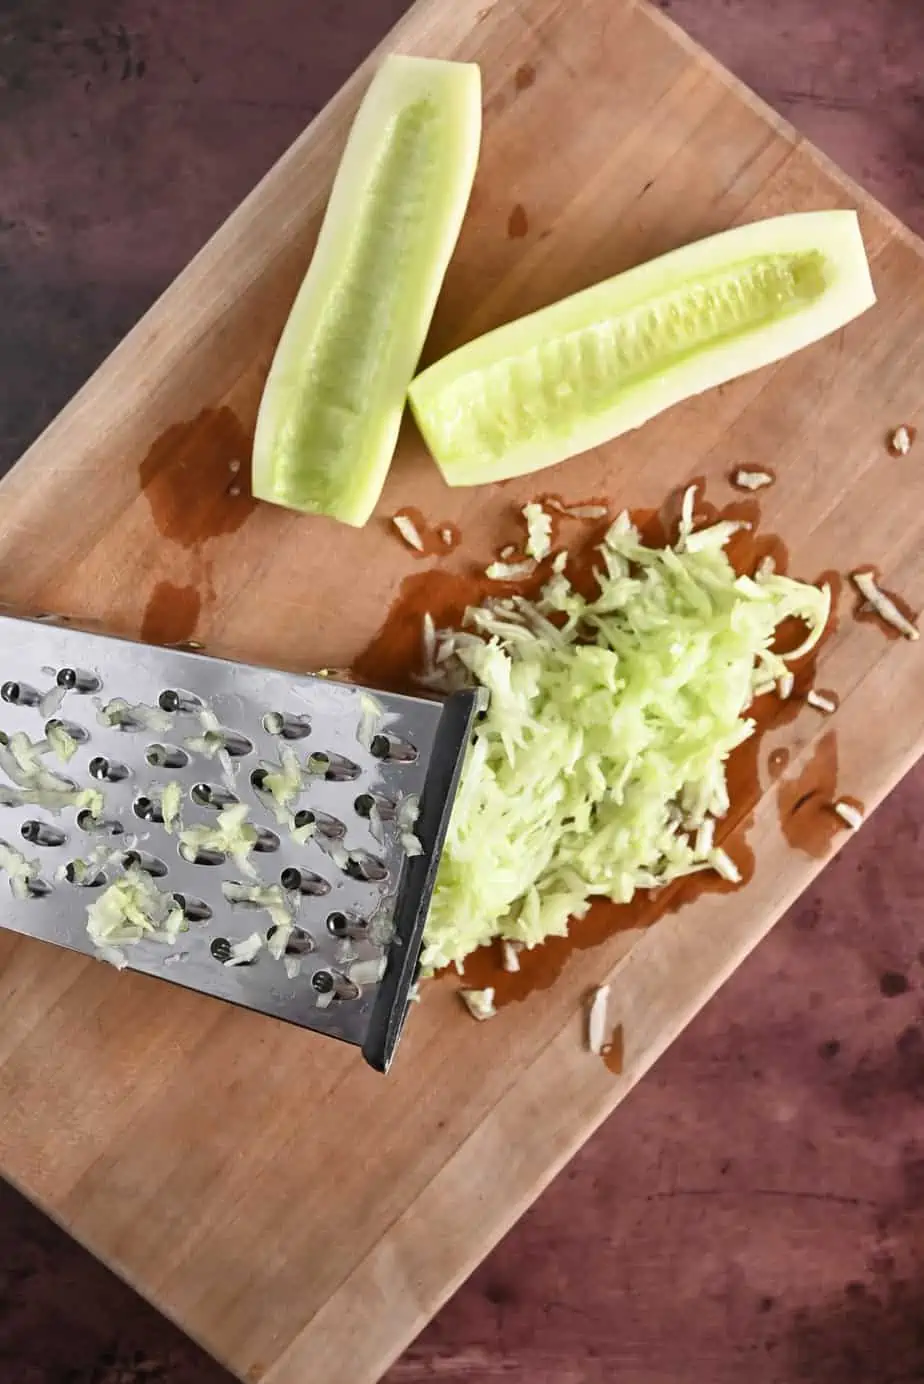 Box grater and grated cucumber on a wooden cutting board next to a halved and seeded cucumber.